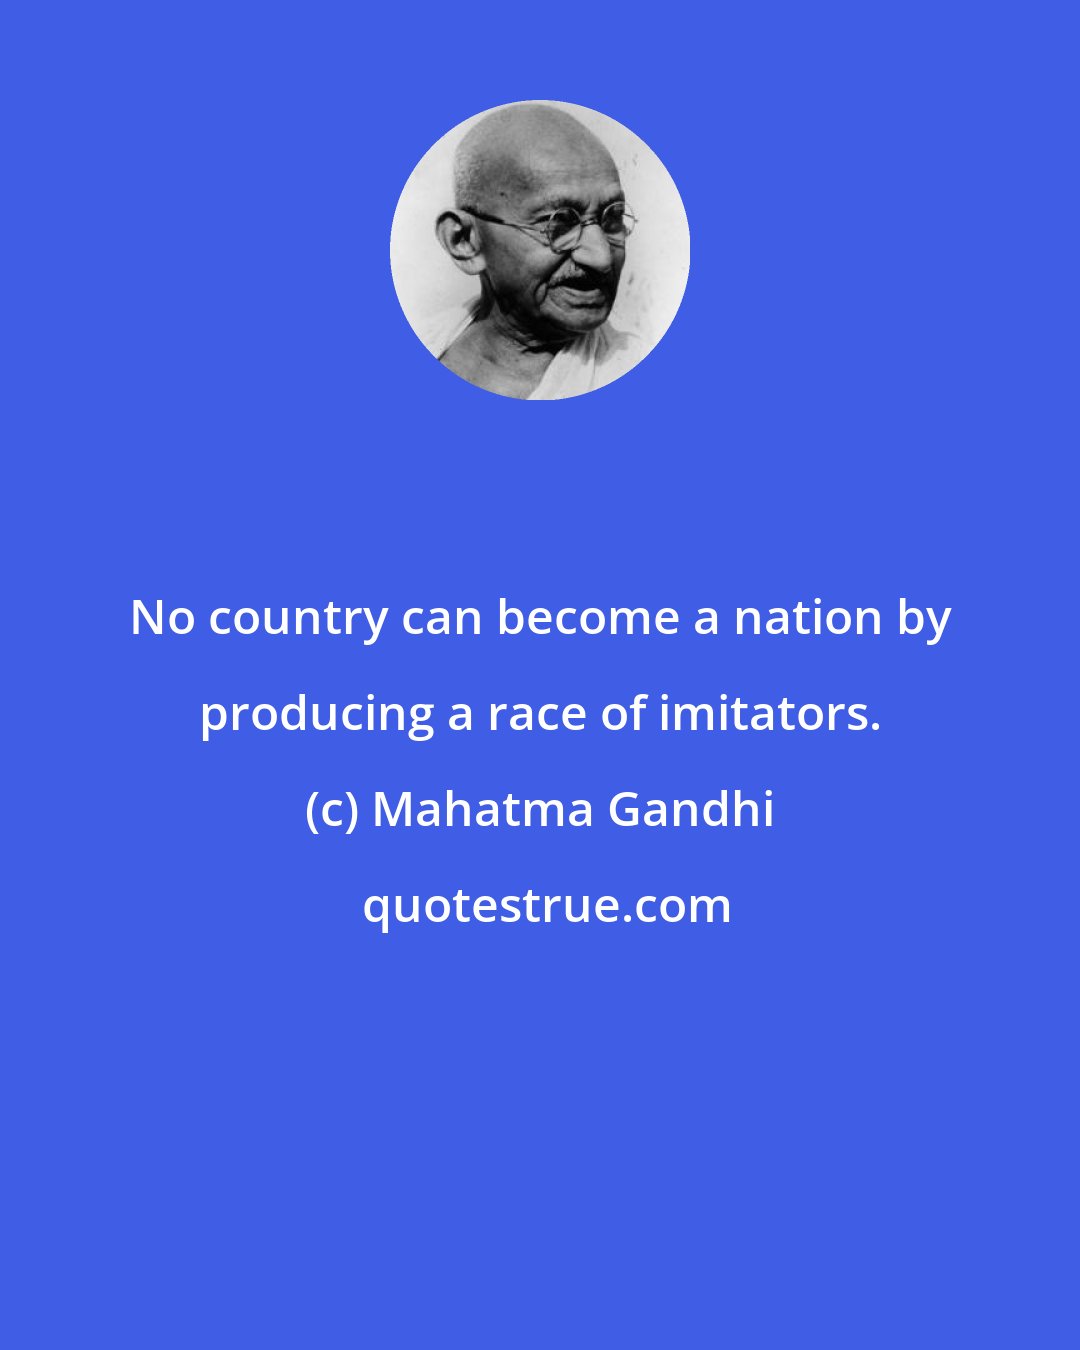 Mahatma Gandhi: No country can become a nation by producing a race of imitators.